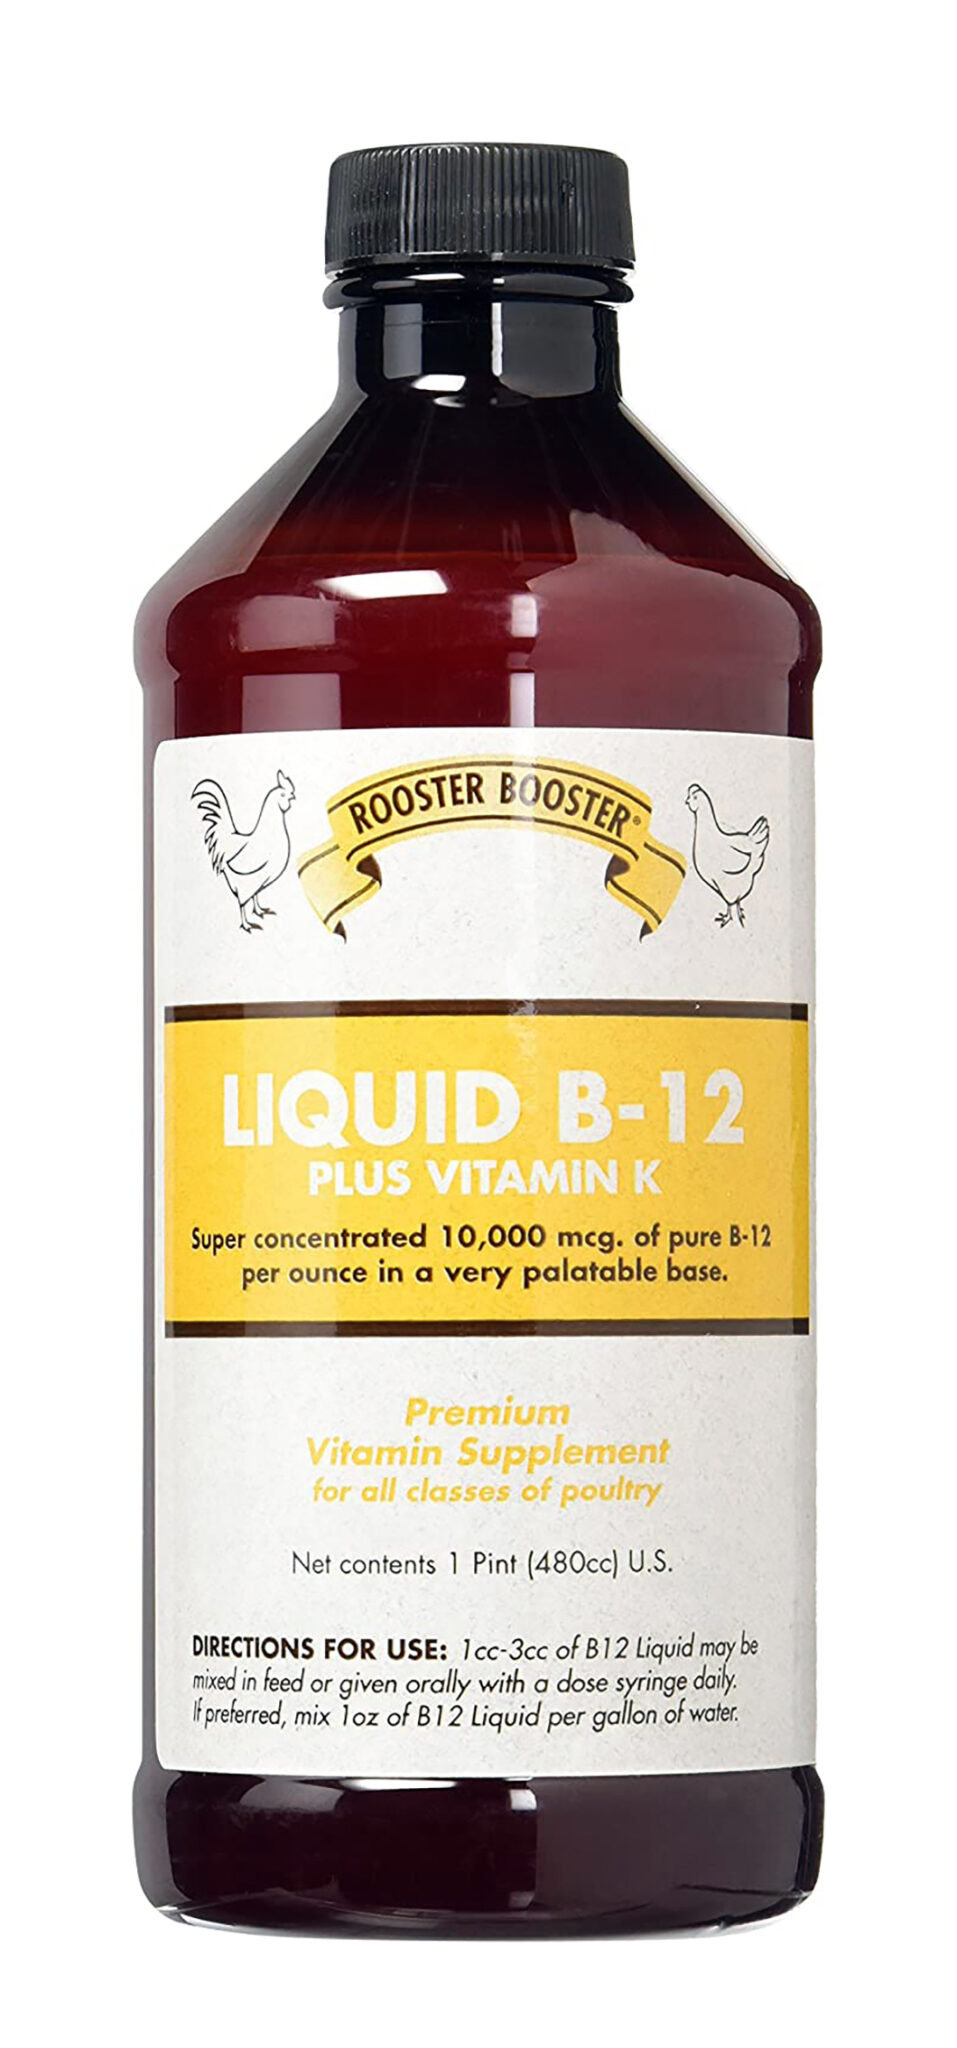 b-12 for chickens